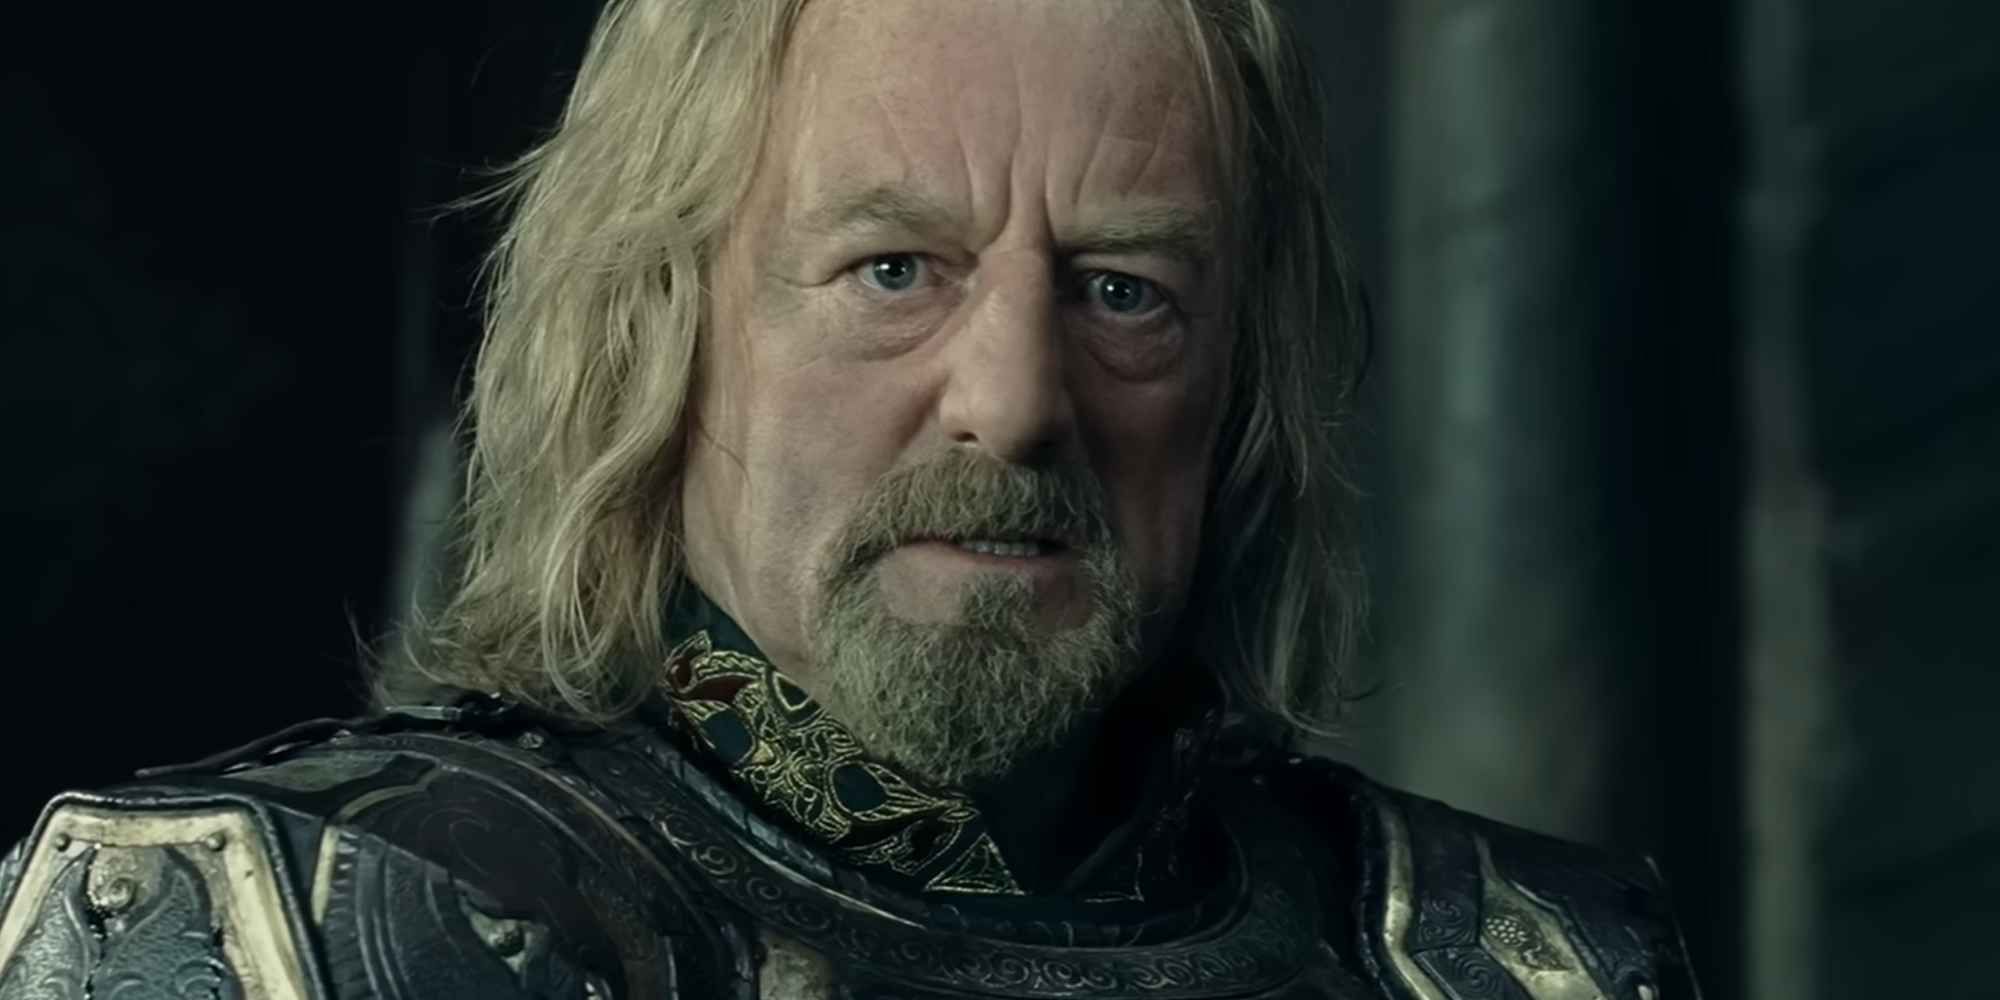 Close-up of King Theoden, clad in armor, before storming out of Helm's Deep